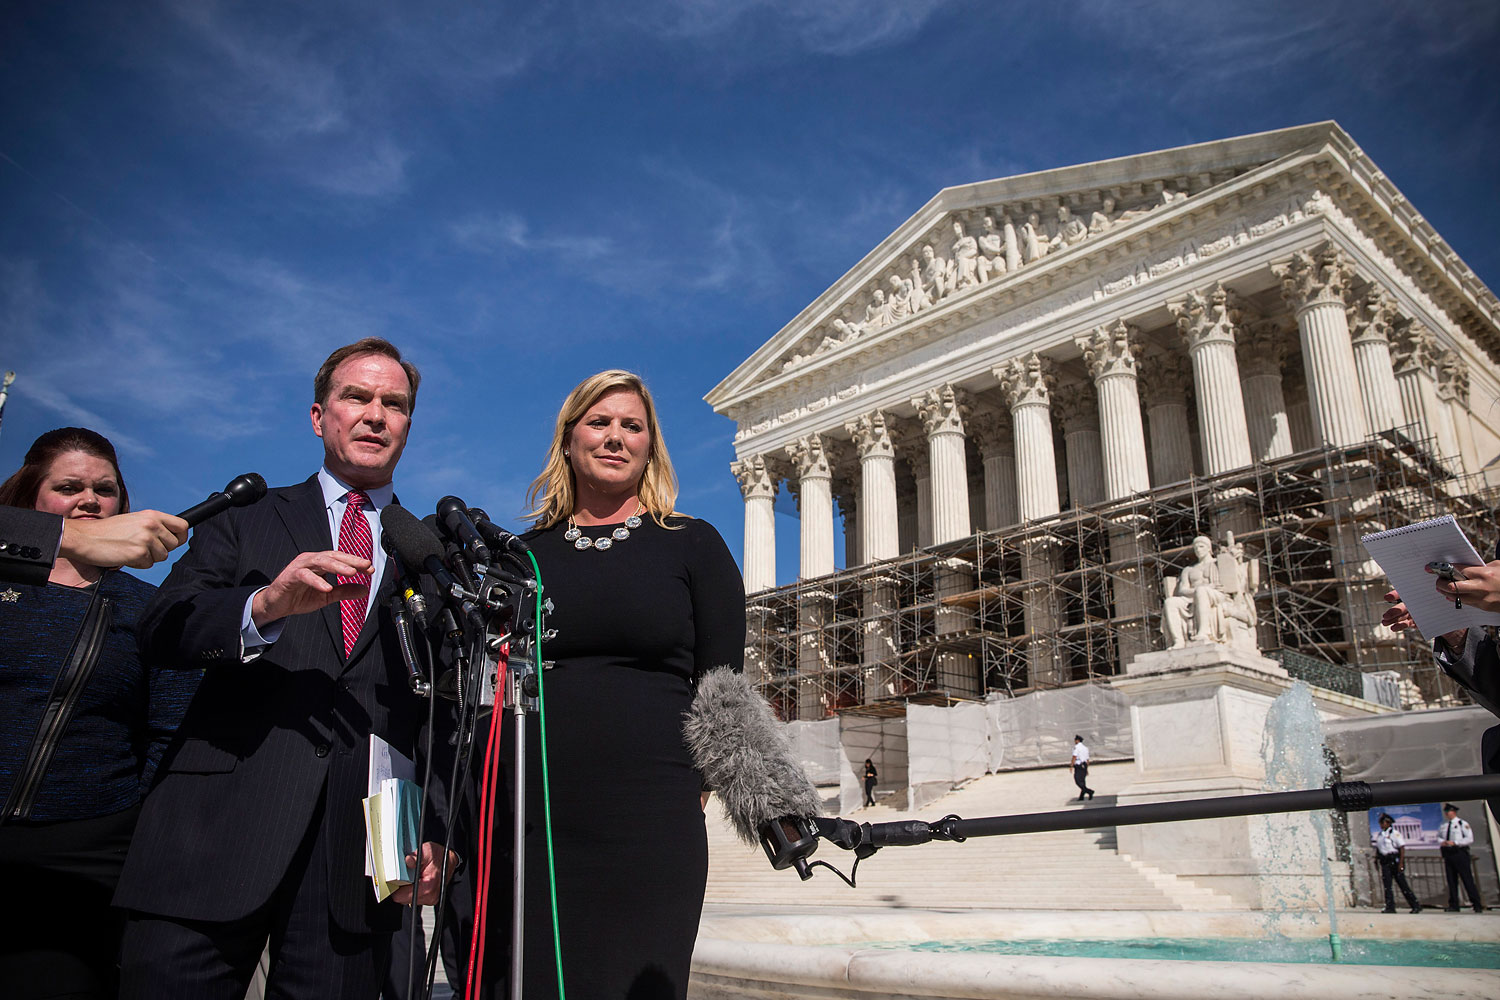 Jennifer Gratz, right, CEO of XIV Foundation and Michigan Attorney General Bill Schuette speak during a press conference outside the Supreme Court after going before the Supreme Court in "Schuette v. Coalition to Defend Affirmative Action" on Oct. 15, 2013 in Washington, DC. (Andrew Burton—Getty Images)